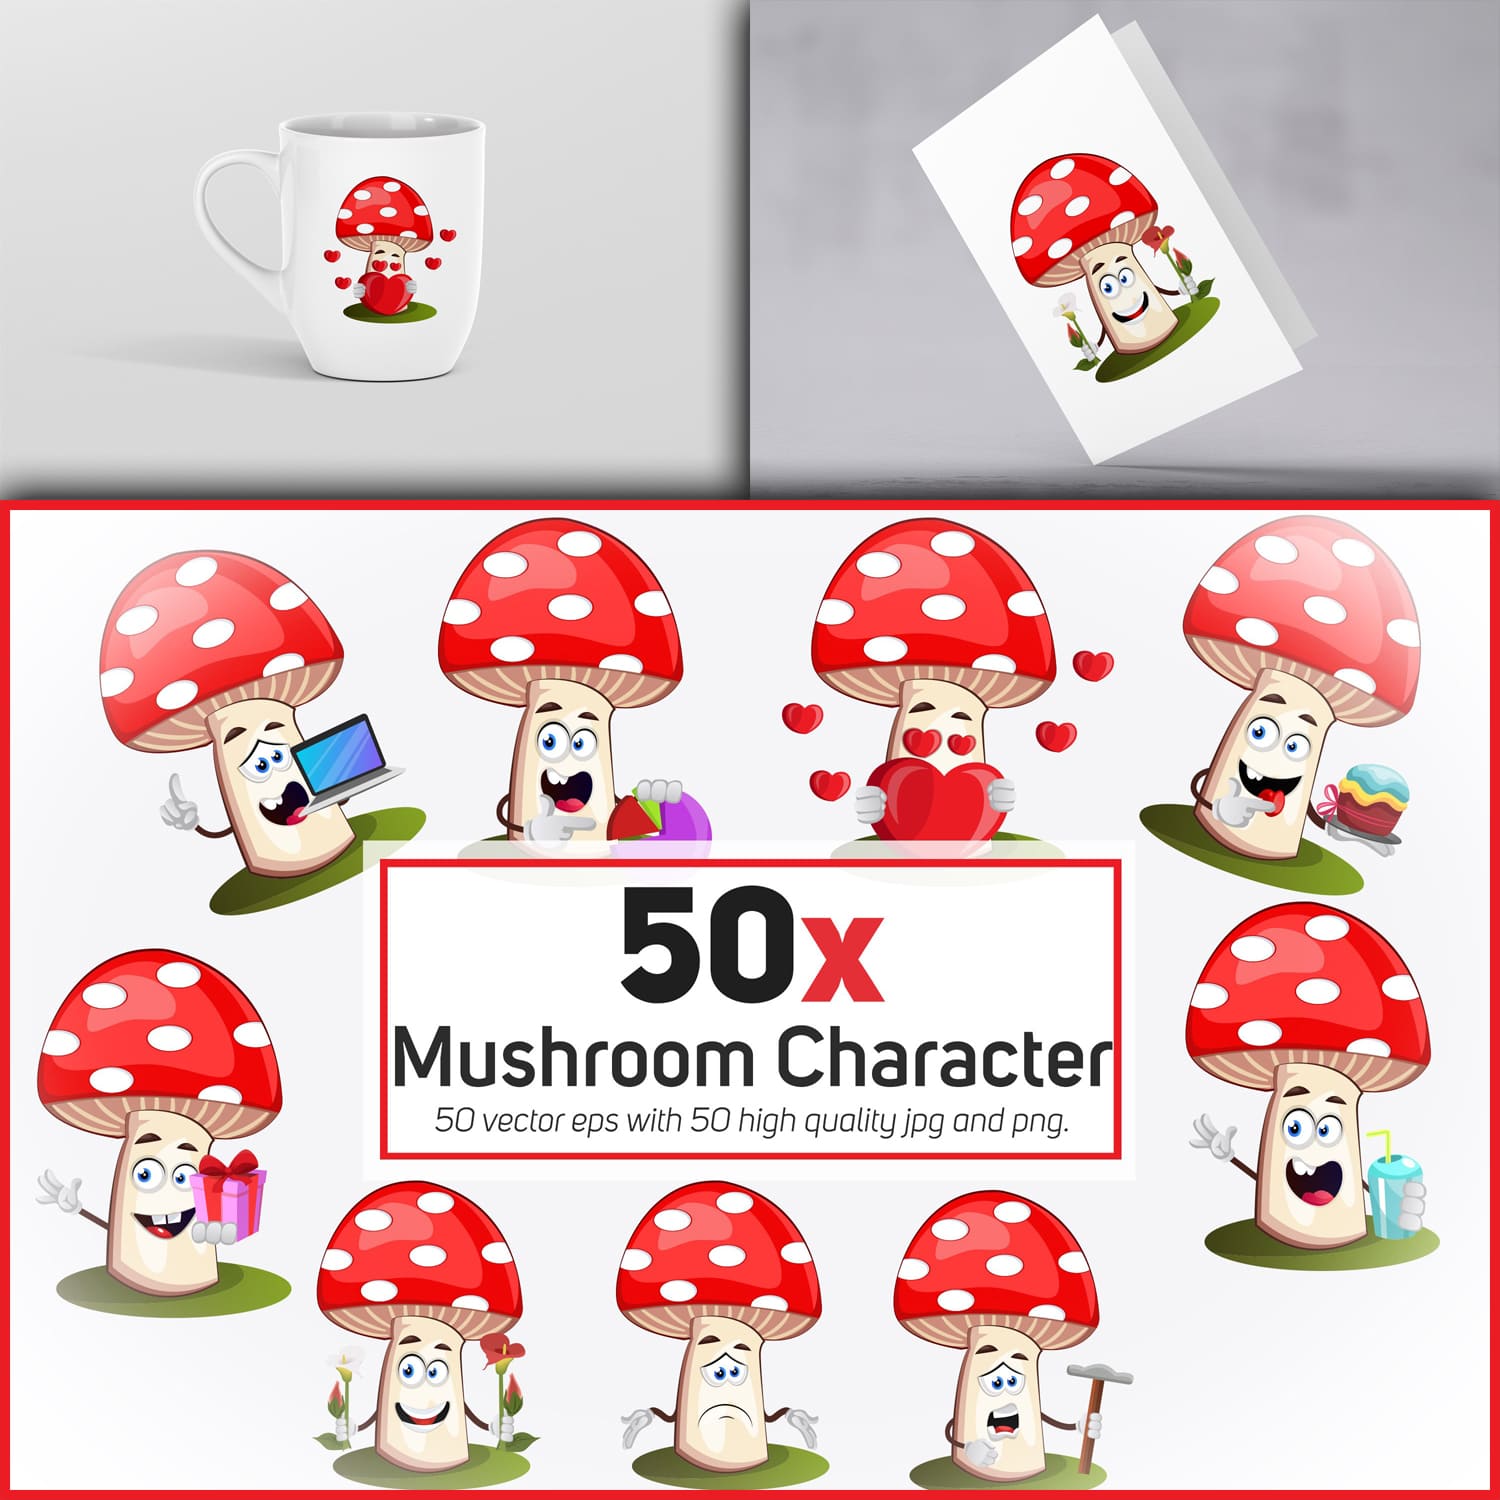 38x Mushroom Character and mascot collection illustration. cover.